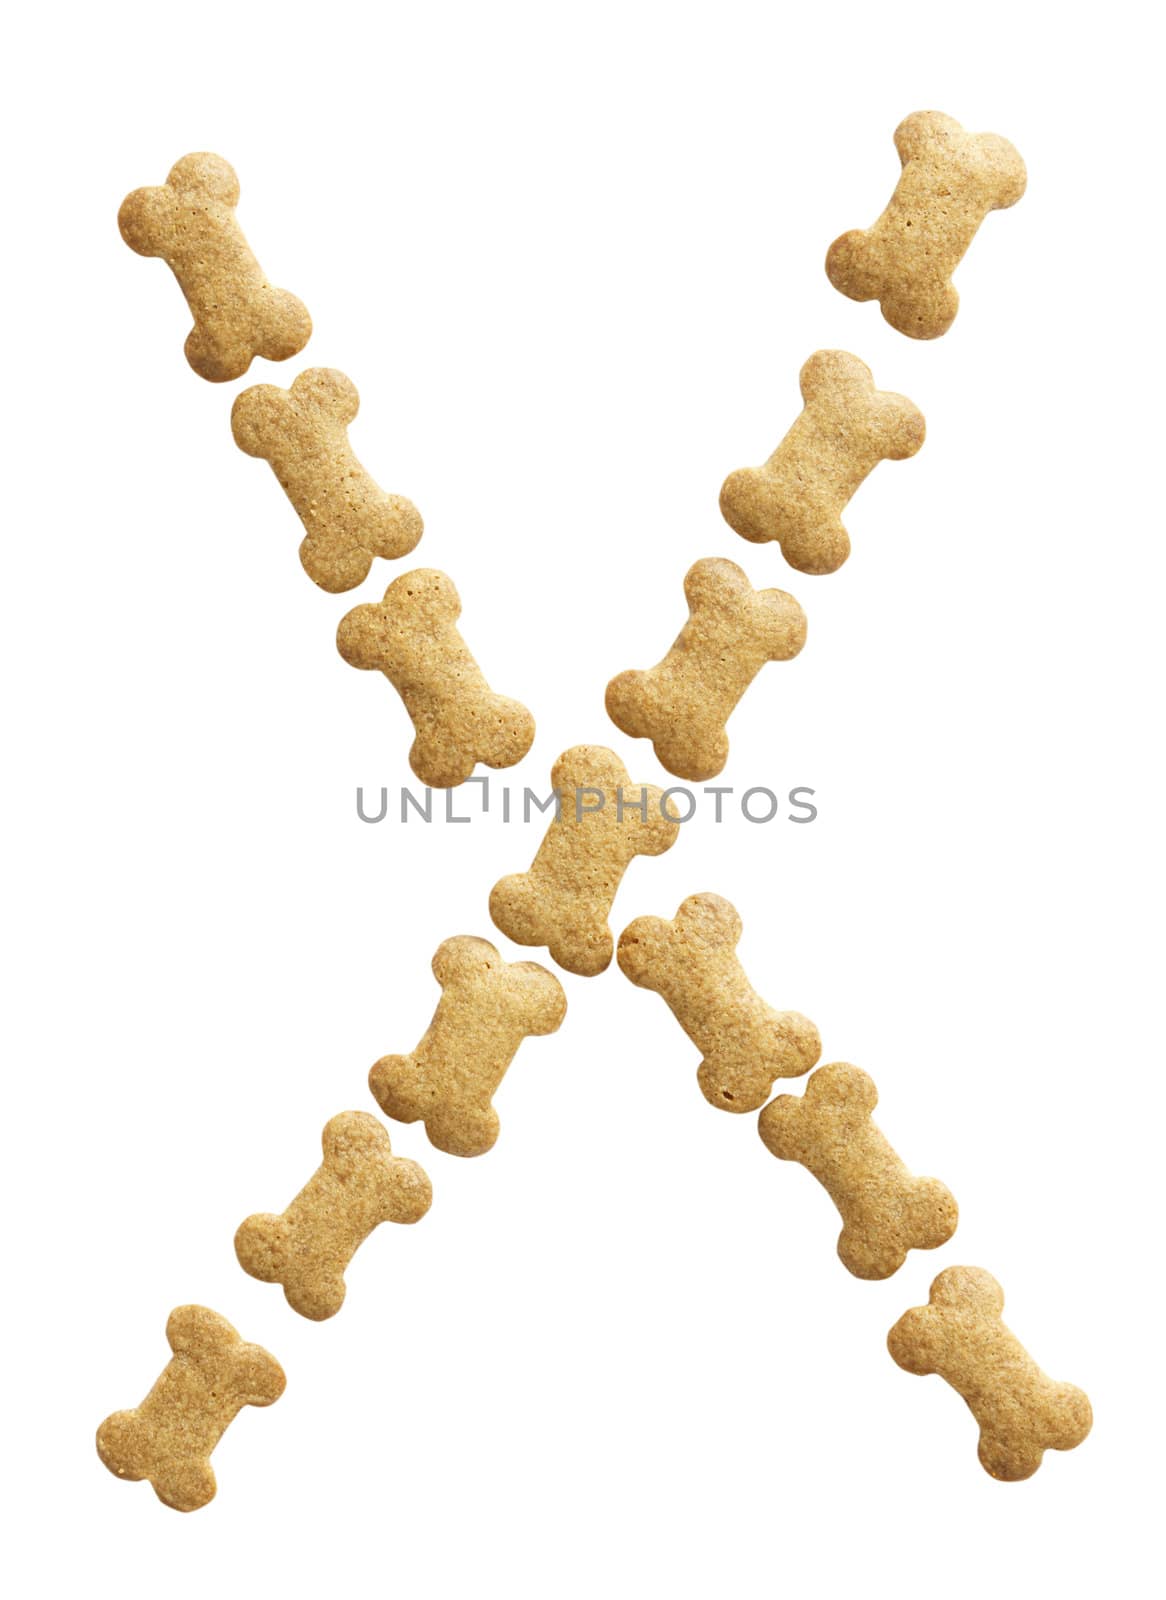 Letter X made of bone shape dog food on white background, shot directly from above